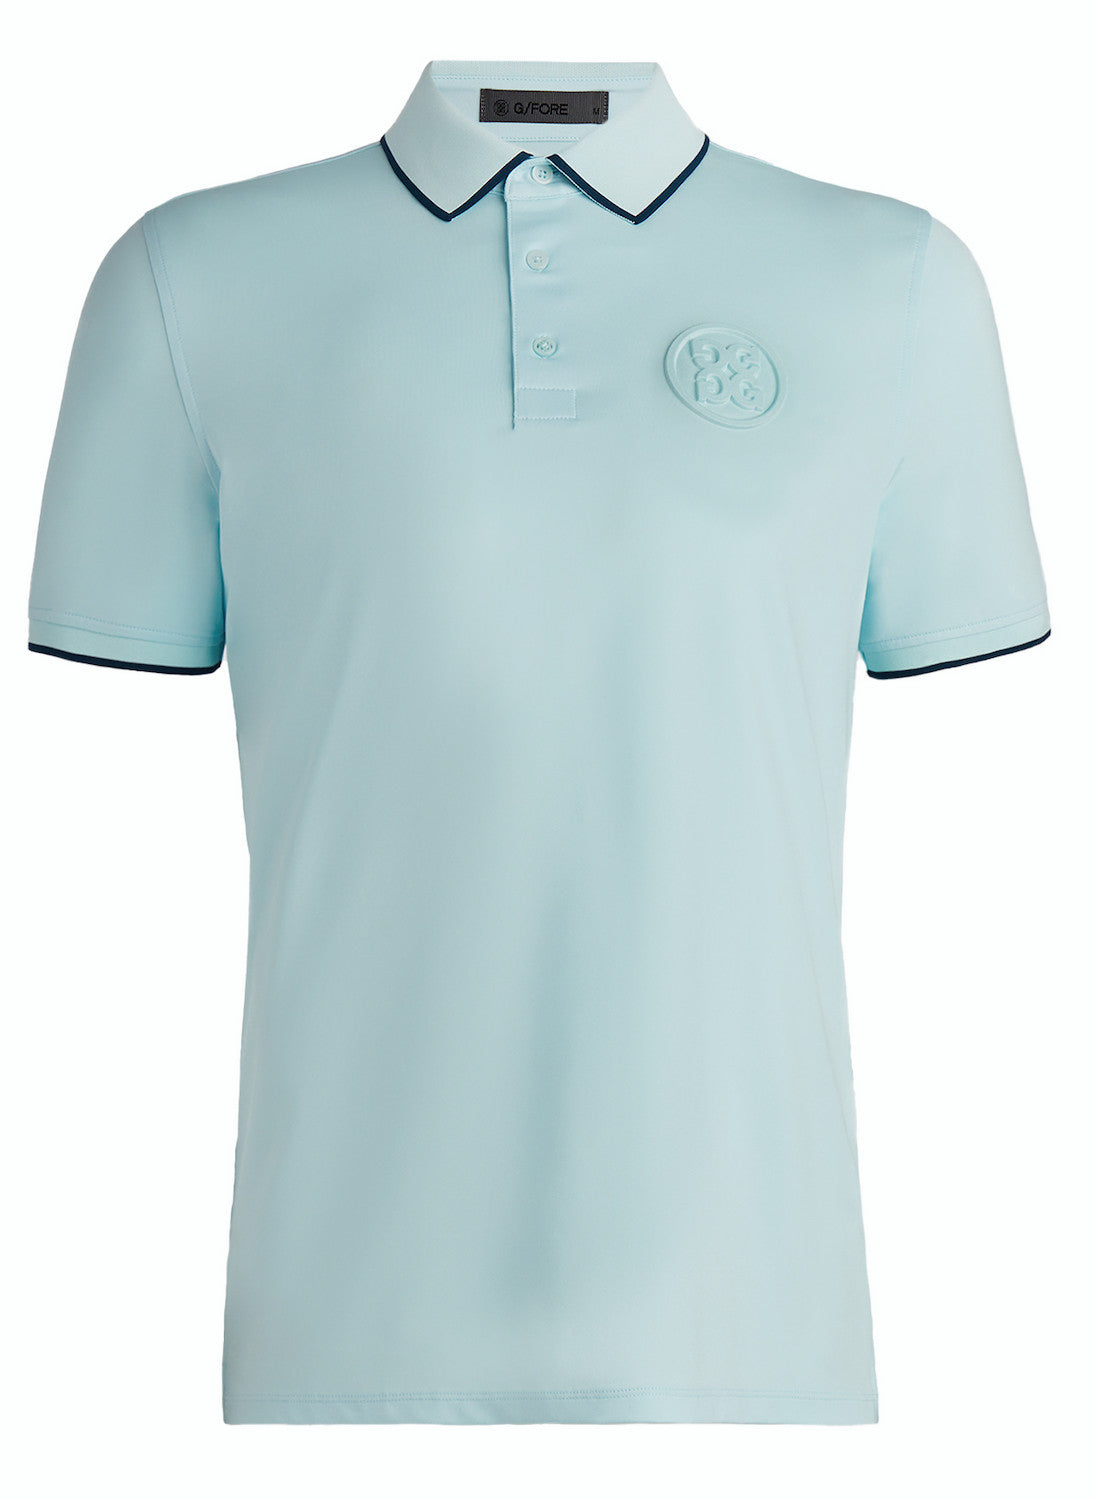 G/Fore Circle G's Embossed Polo - Daybreak